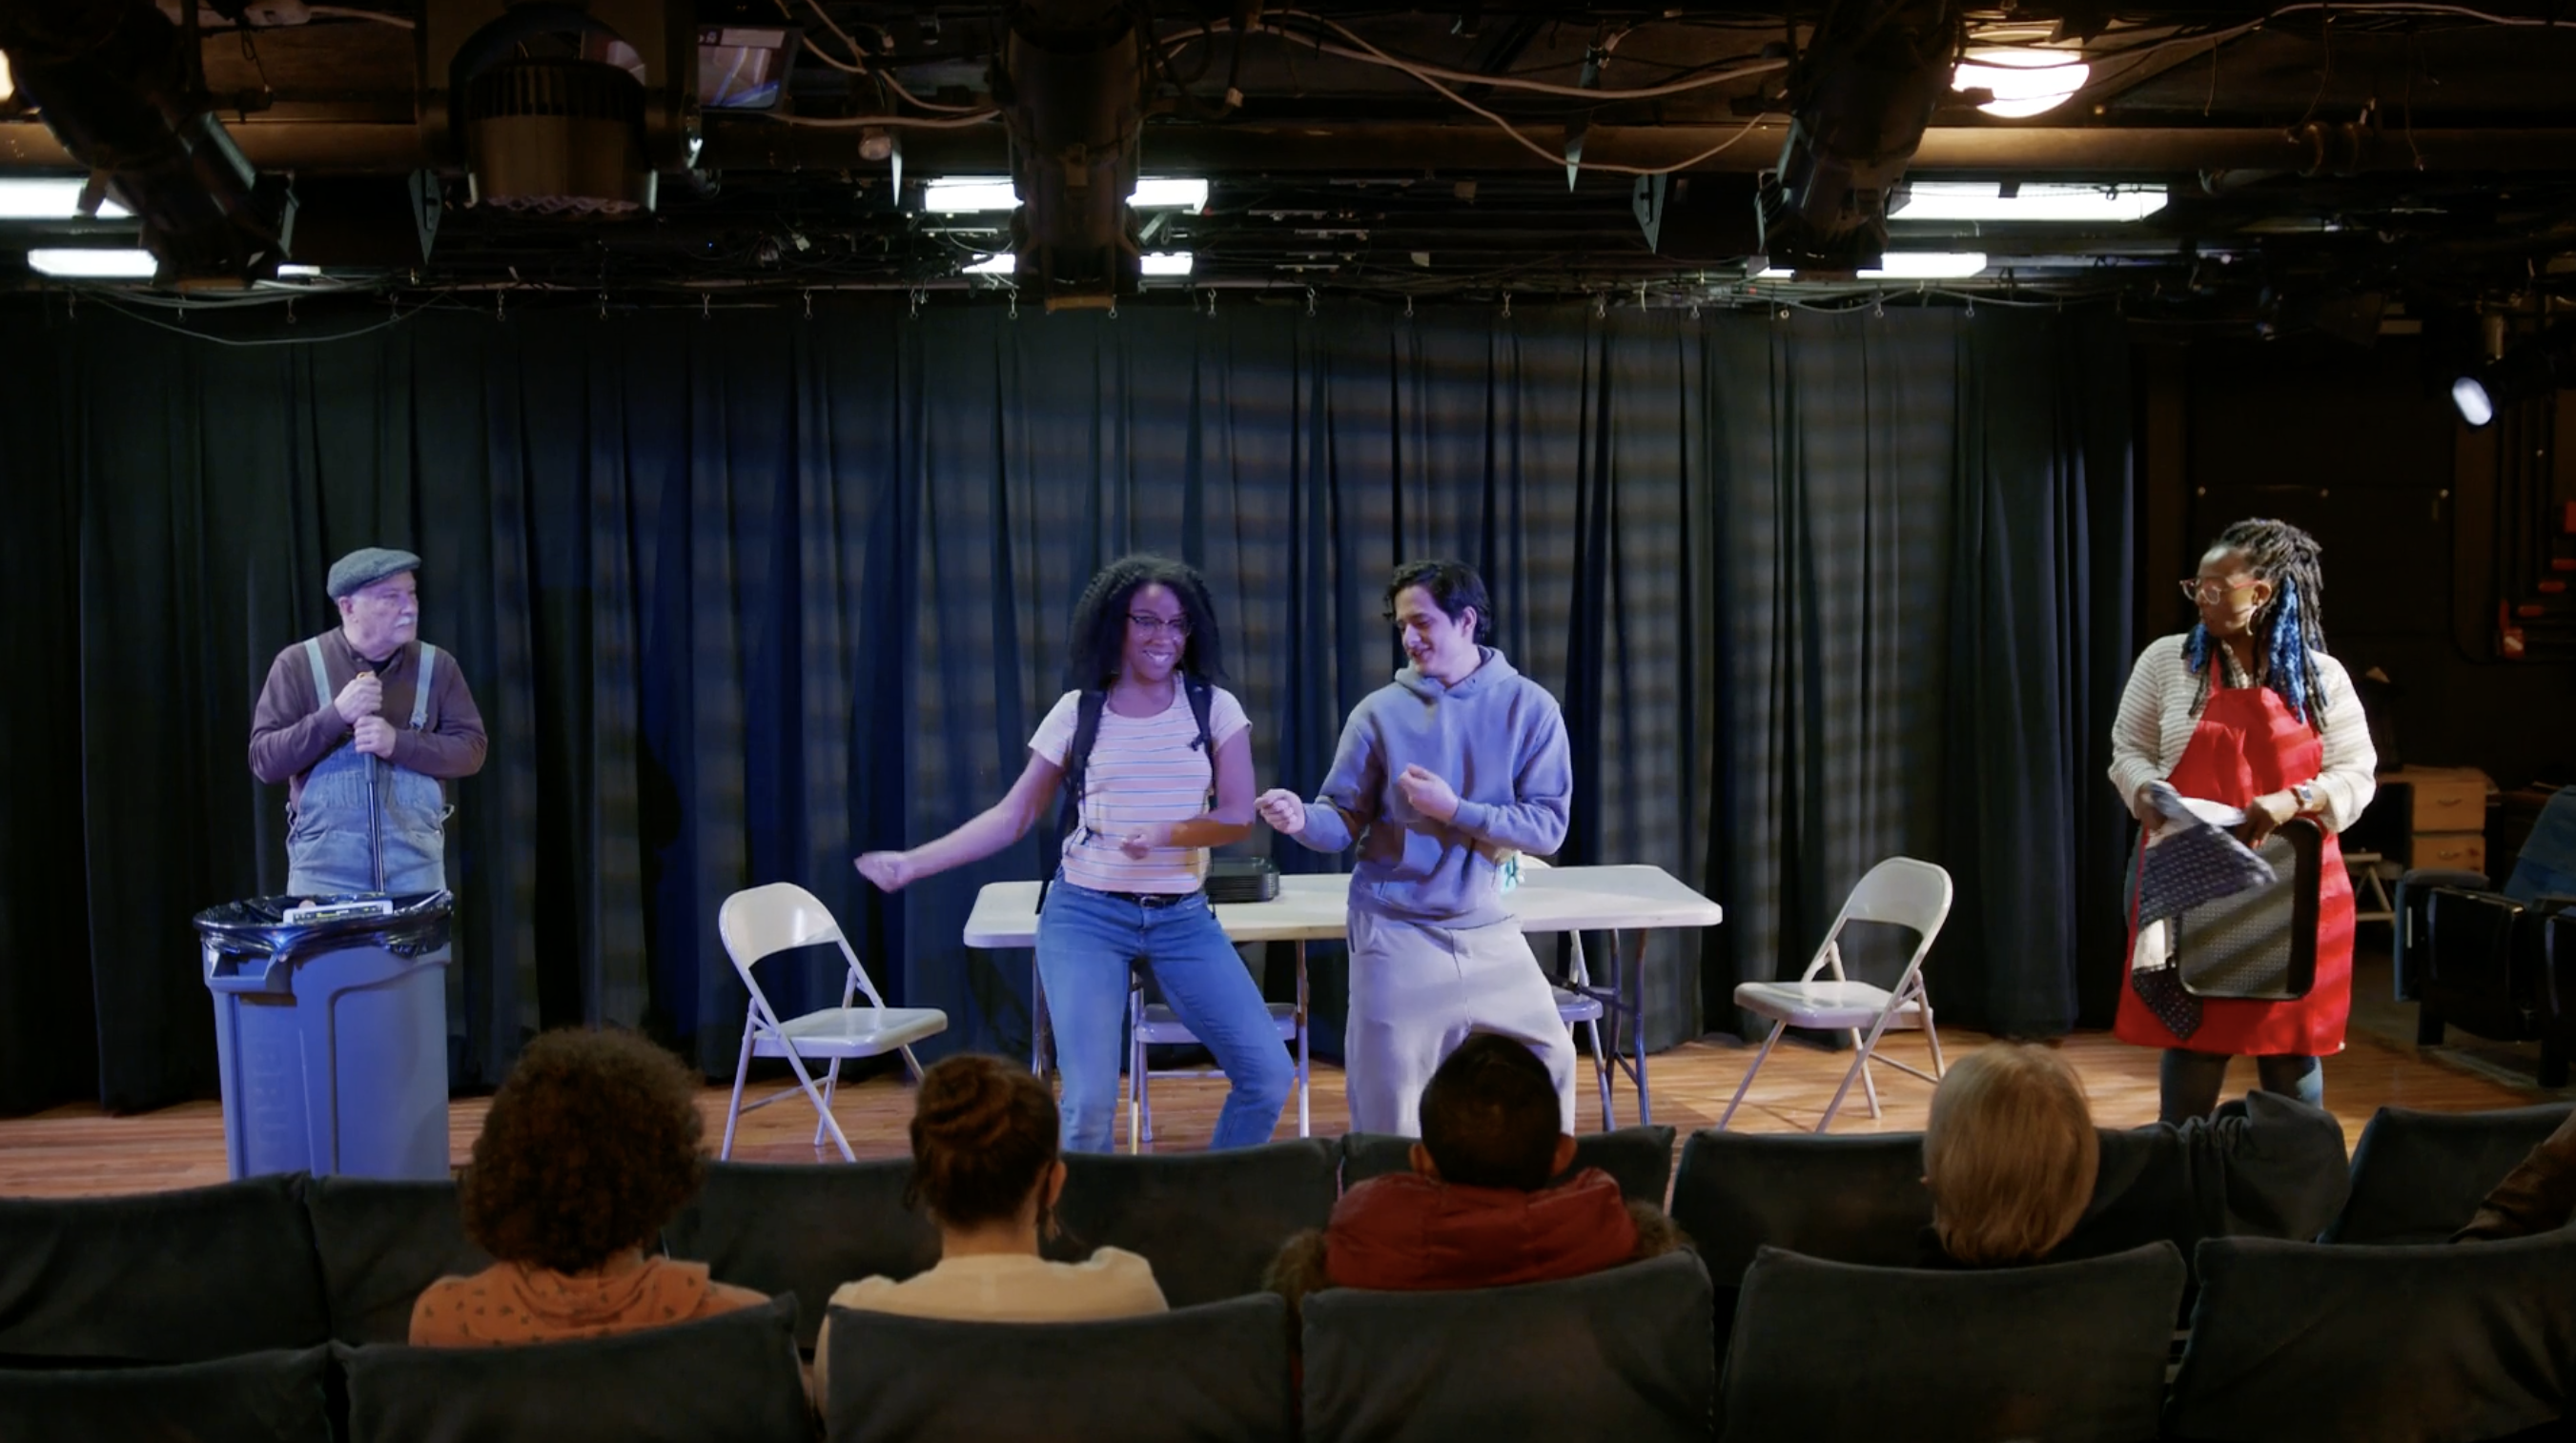 Actors smile and dance on stage in front of a folding table and chairs.